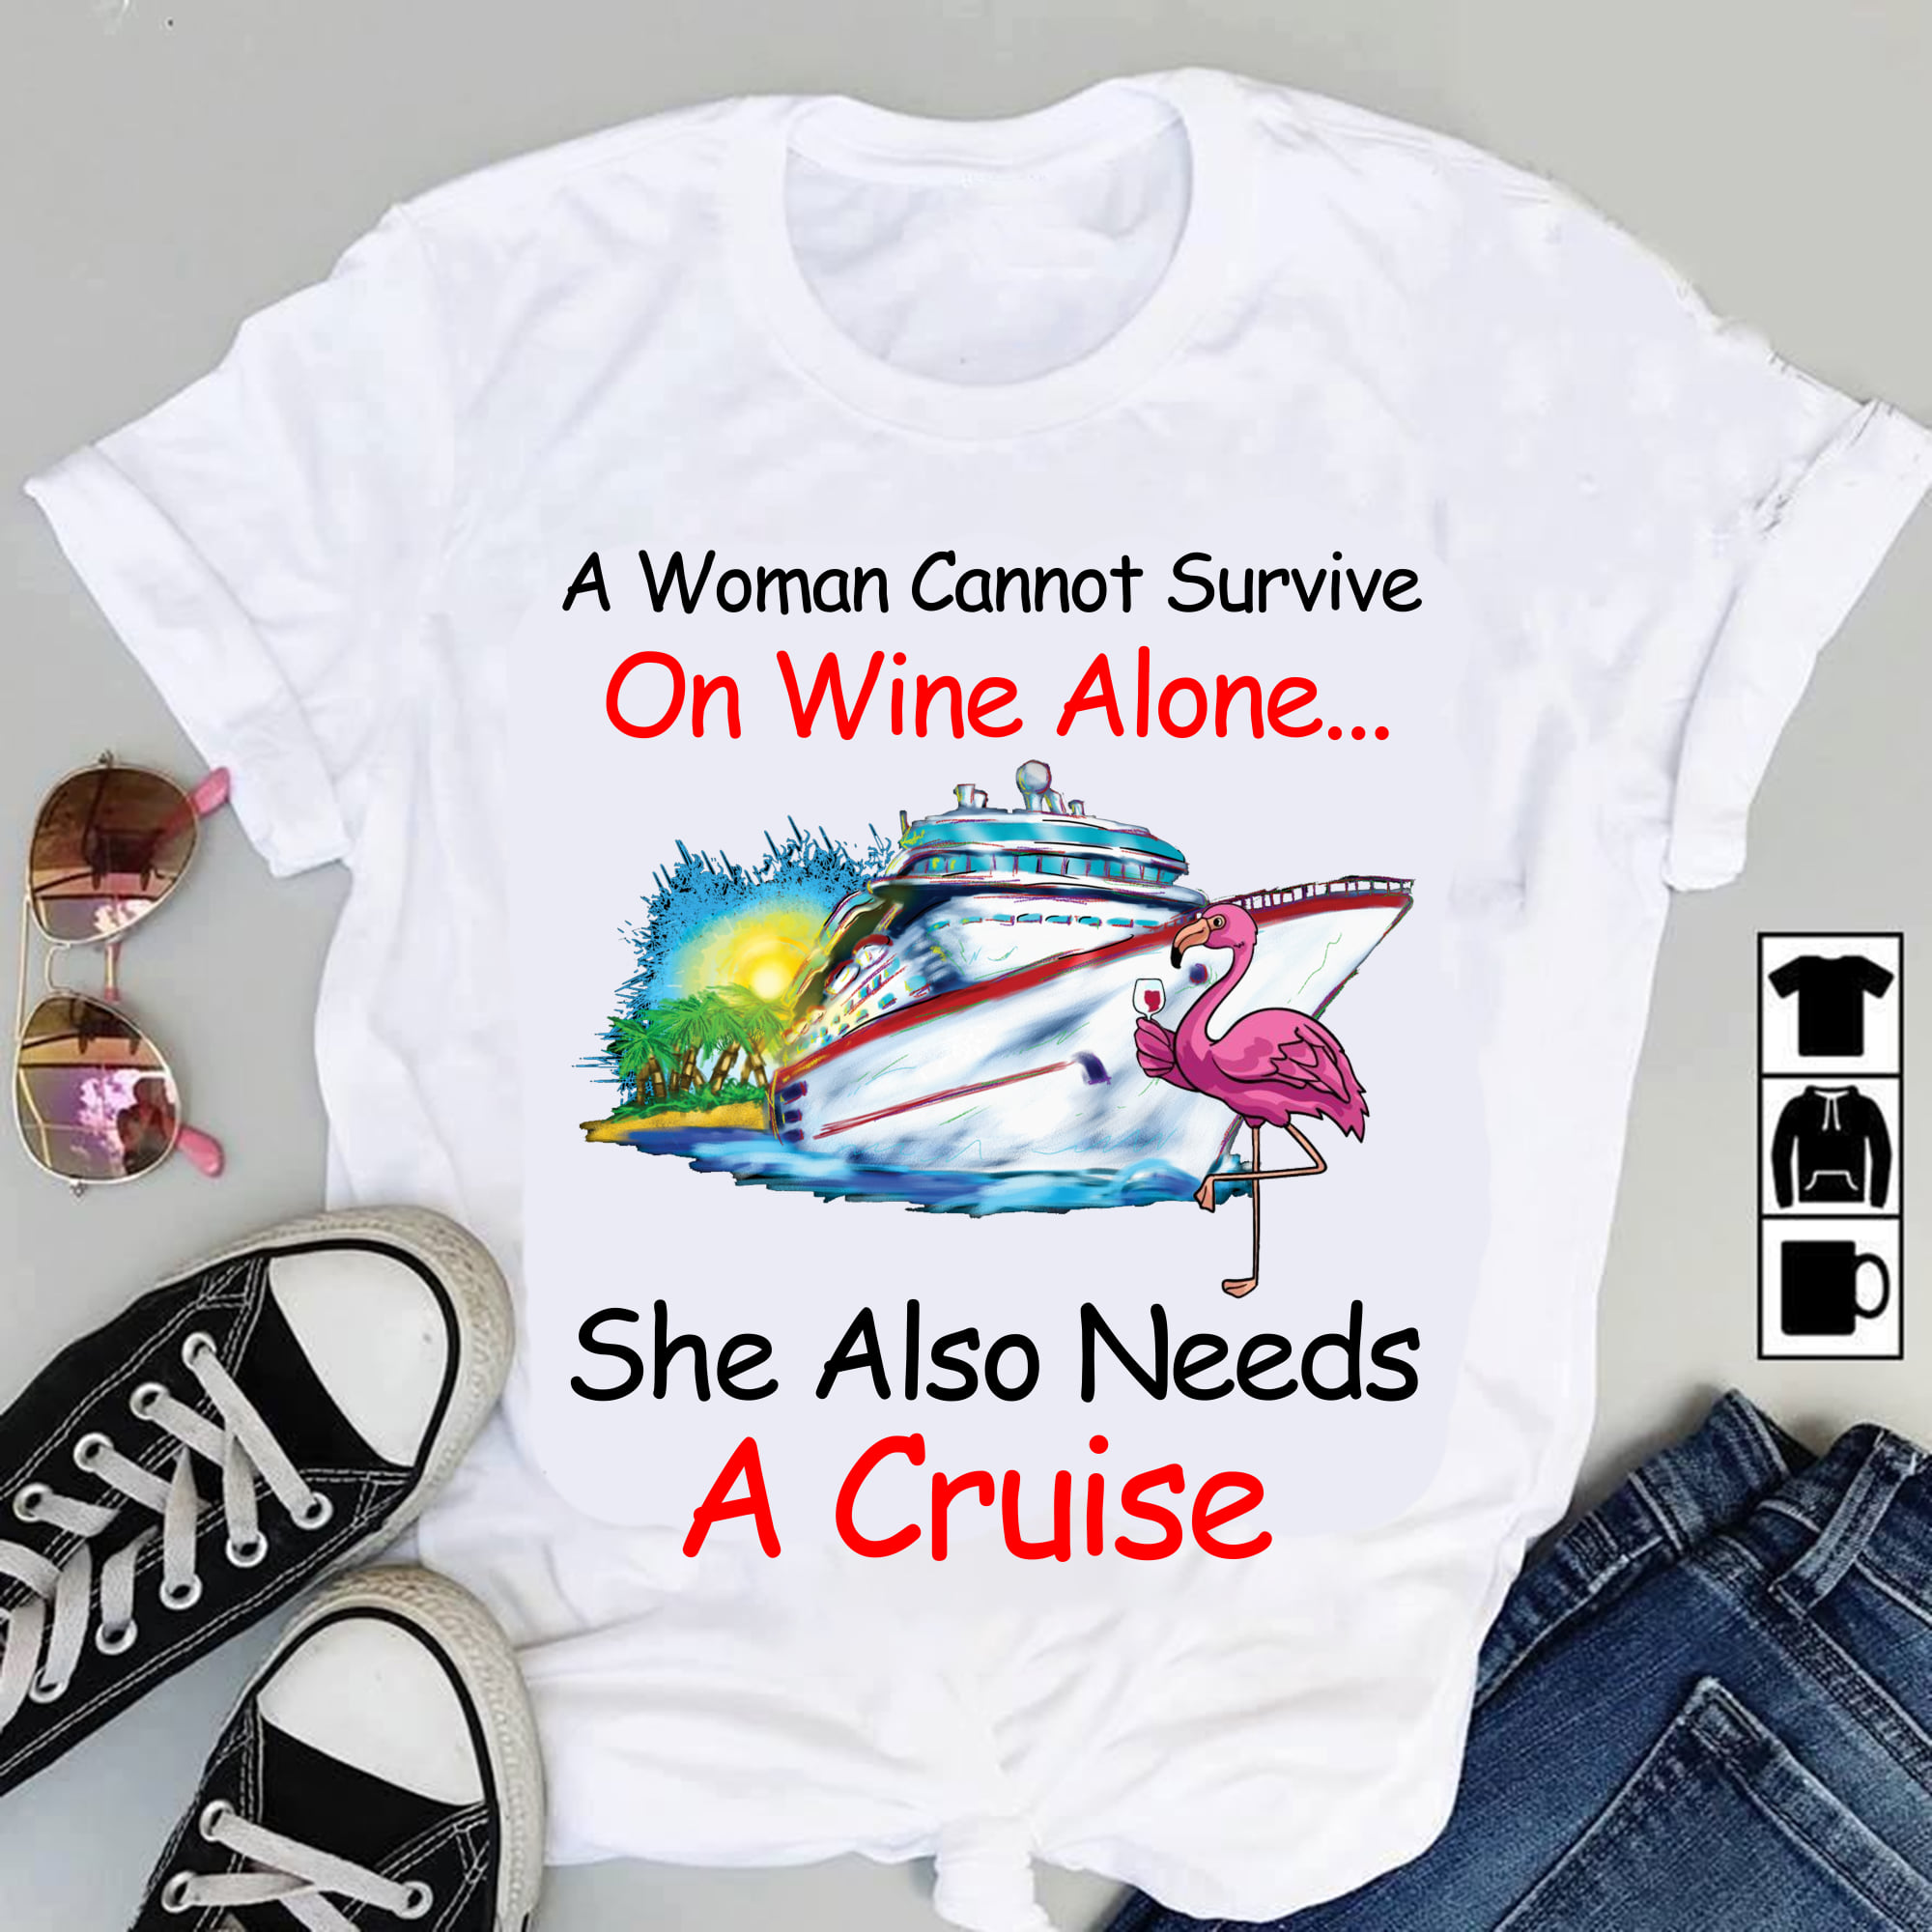 A woman cannot survive on wine alone she also needs a cruise - Flamingo and cruising